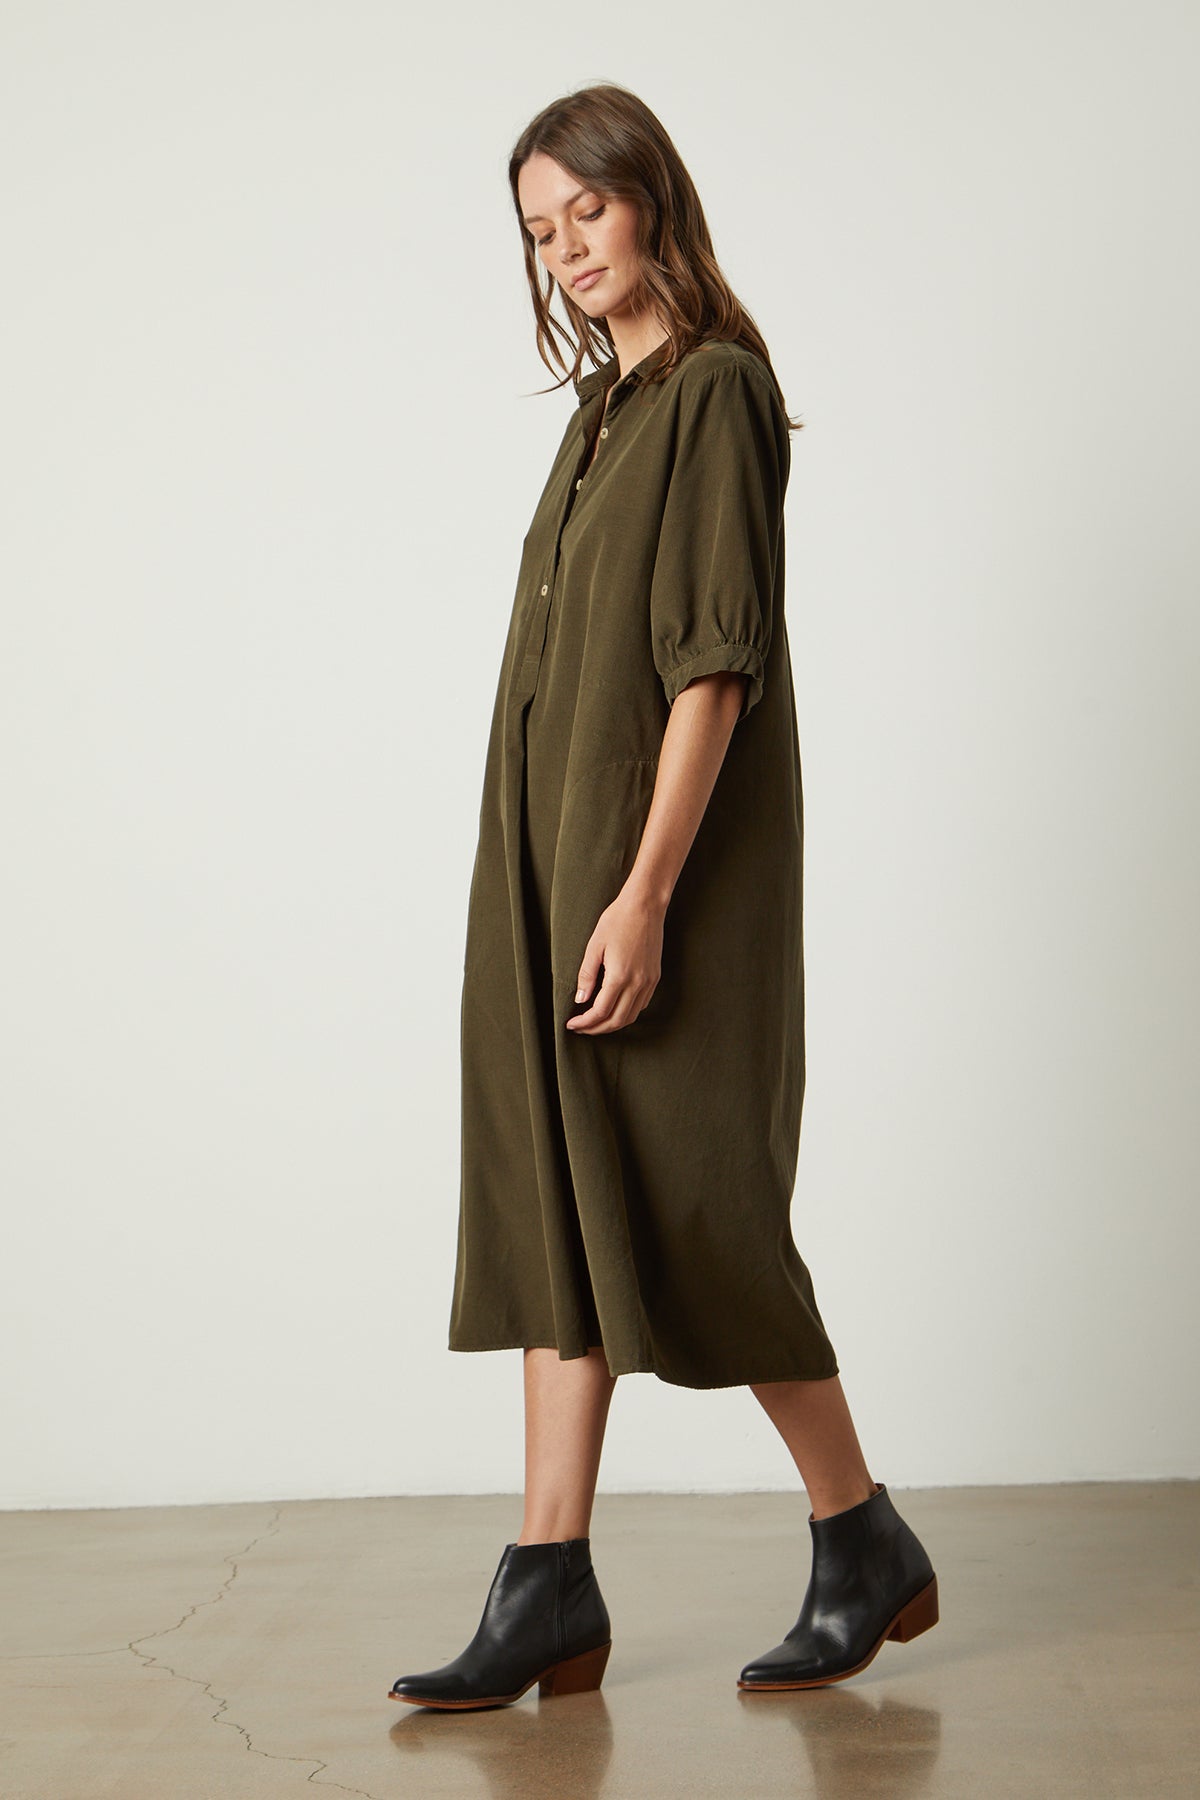 A soft, pinwhale corduroy JOSIE CORDUROY DRESS by Velvet by Graham & Spencer in green, paired with black boots and featuring a detachable belt.-25085241360577